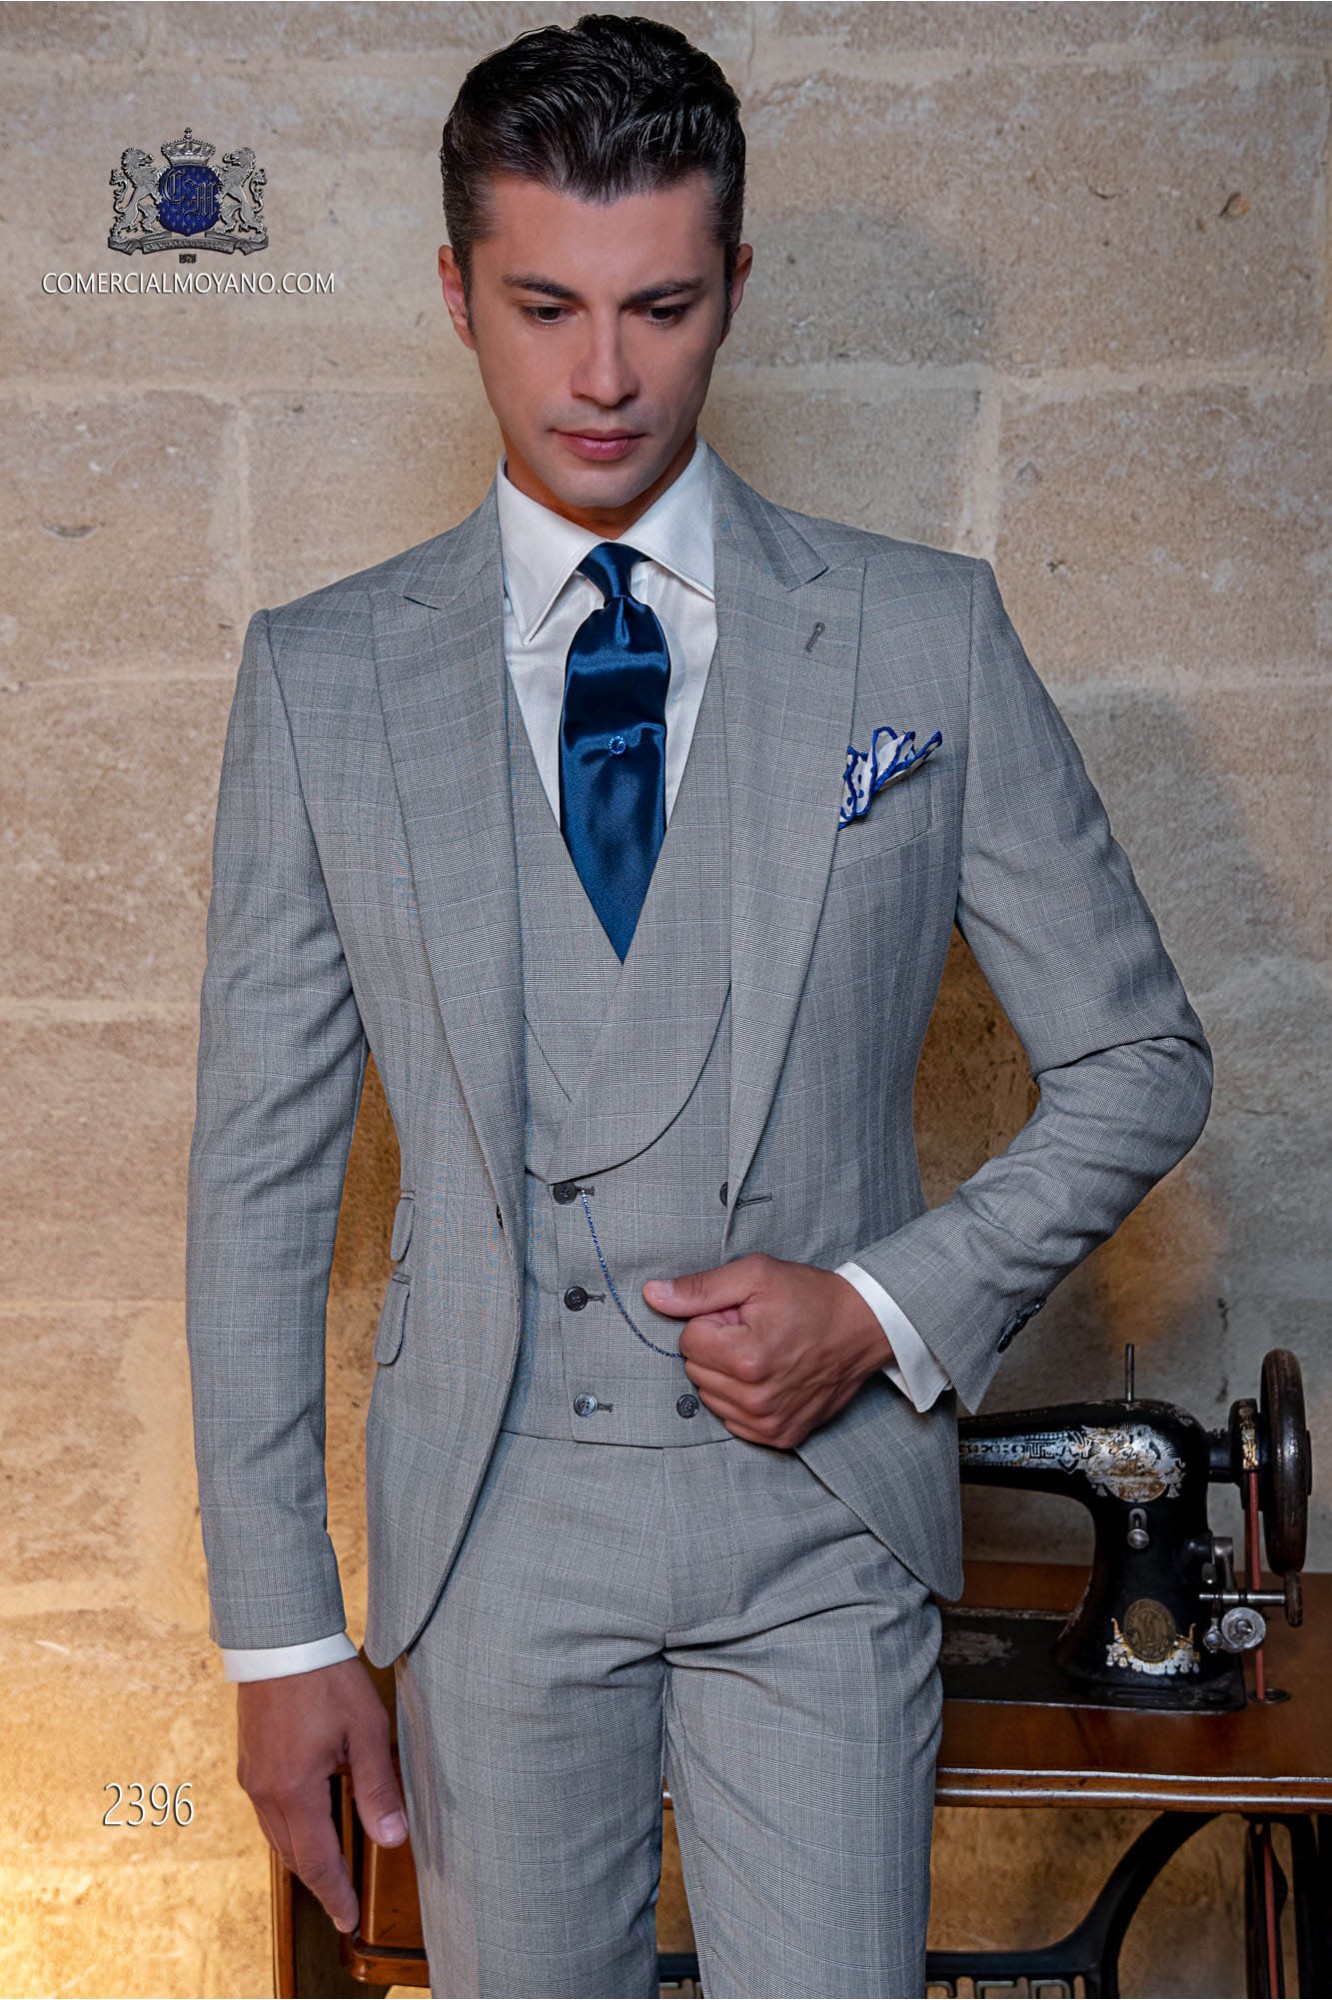 Bespoke Prince of Wales light grey and blue suit